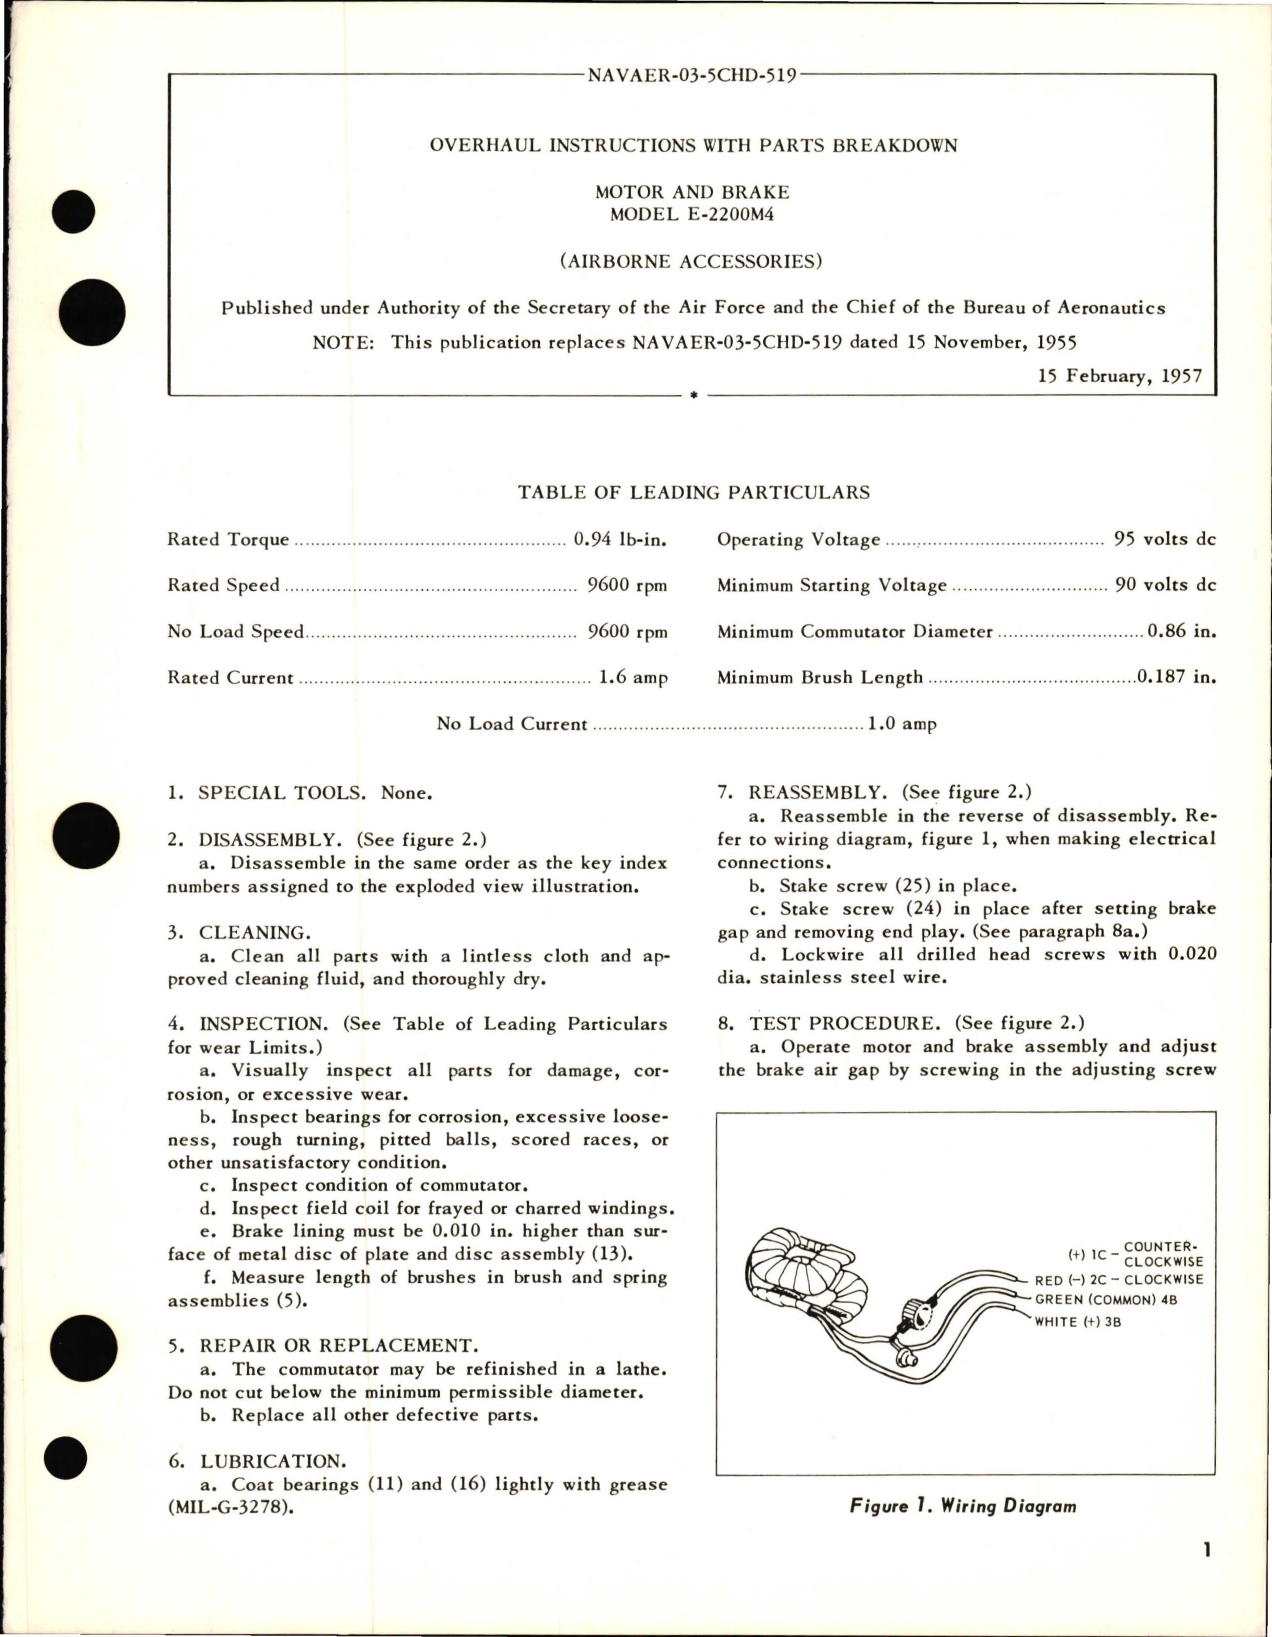 Sample page 1 from AirCorps Library document: Overhaul Instructions with Parts Breakdown for Motor and Brake Model E-2200M4 